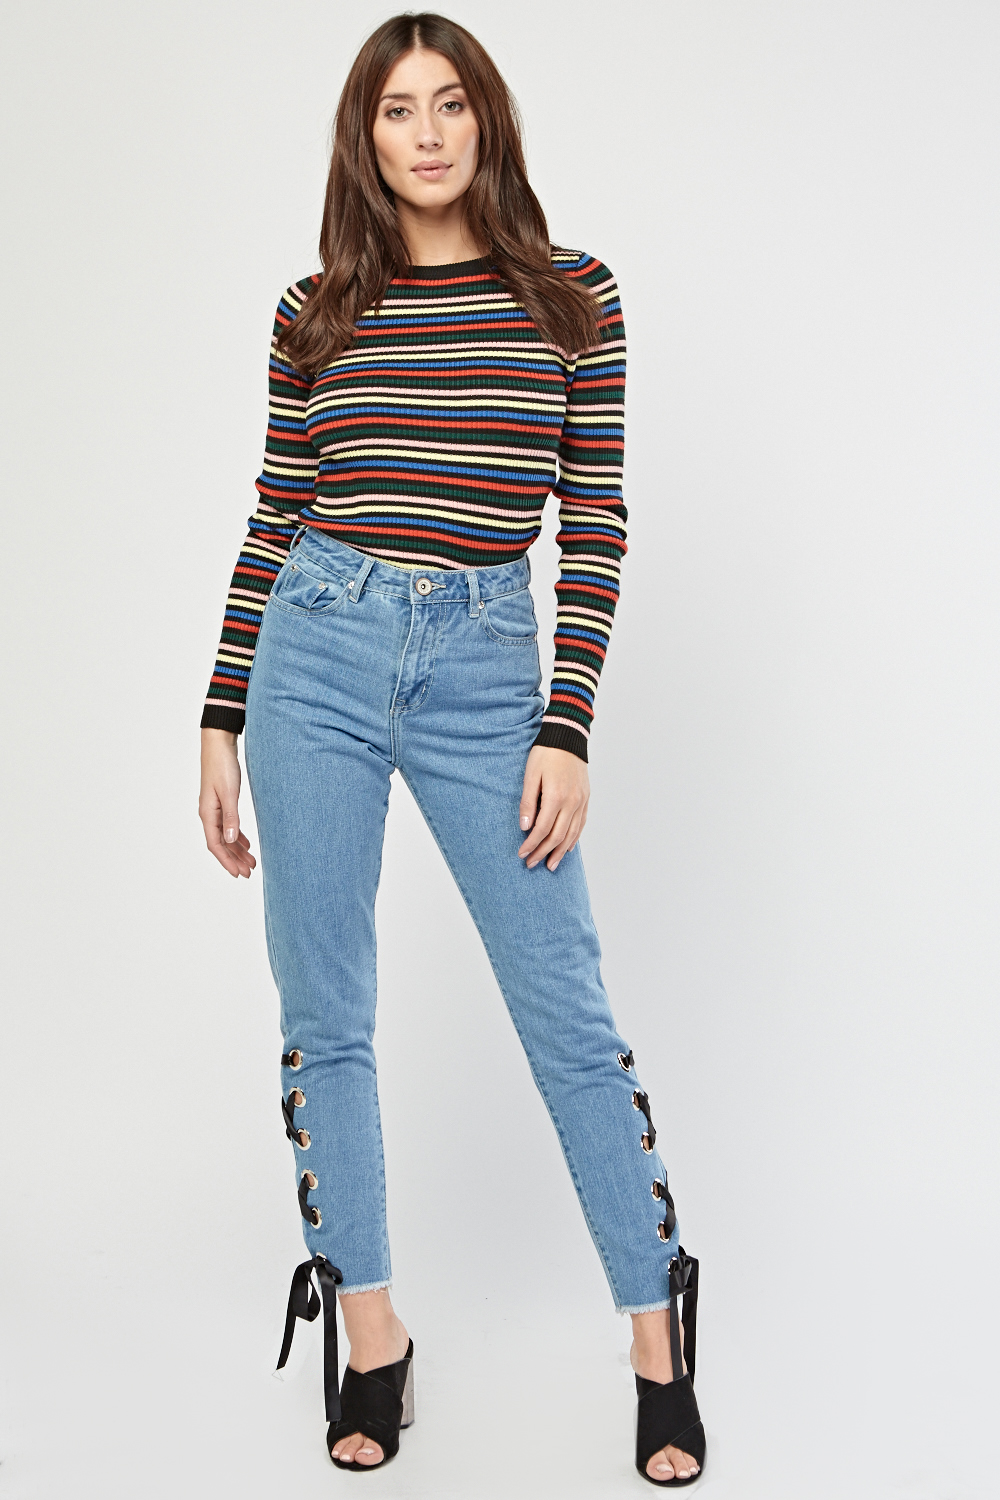 Lace Up Eyelet Trim Jeans - Just $3